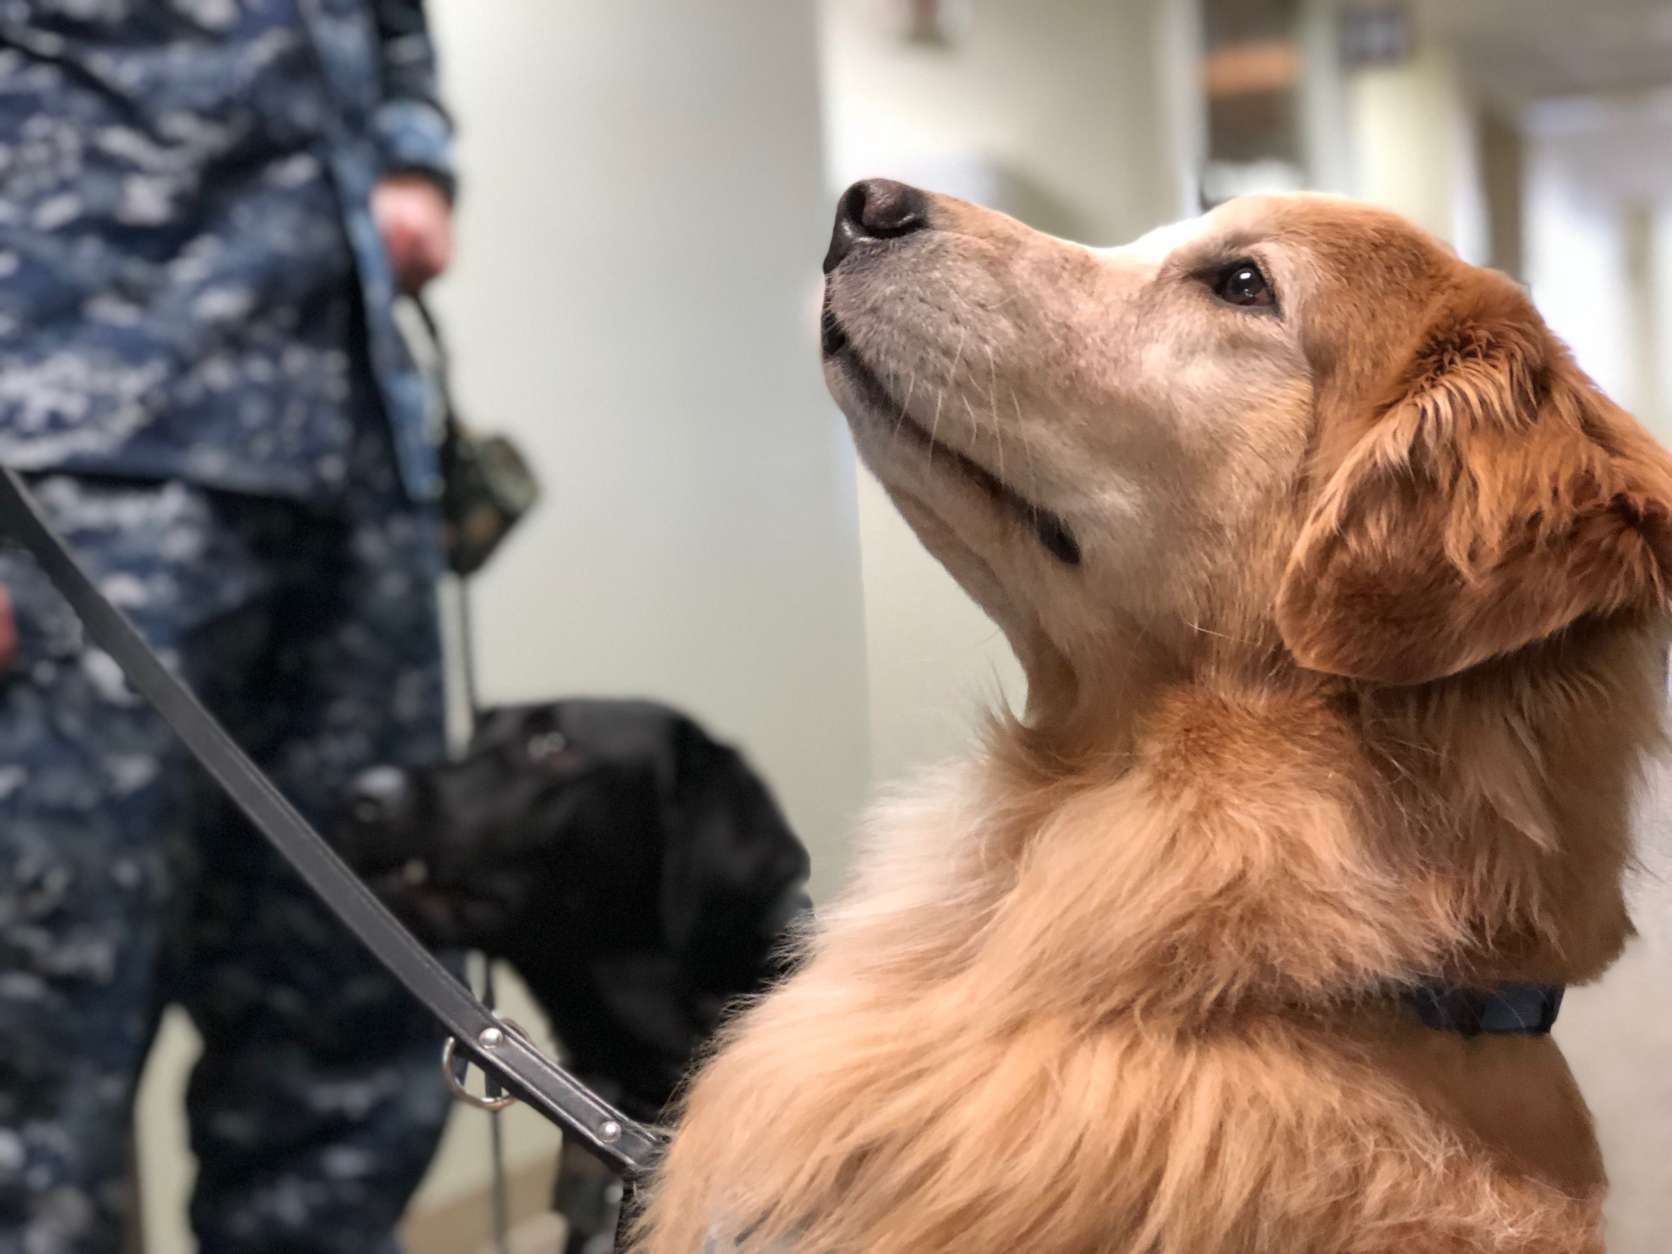 Goldie is one of the facility dogs at Walter Reed National Military Medical Center. Her handlers say she is a social butterfly. (WTOP/Kate Ryan)